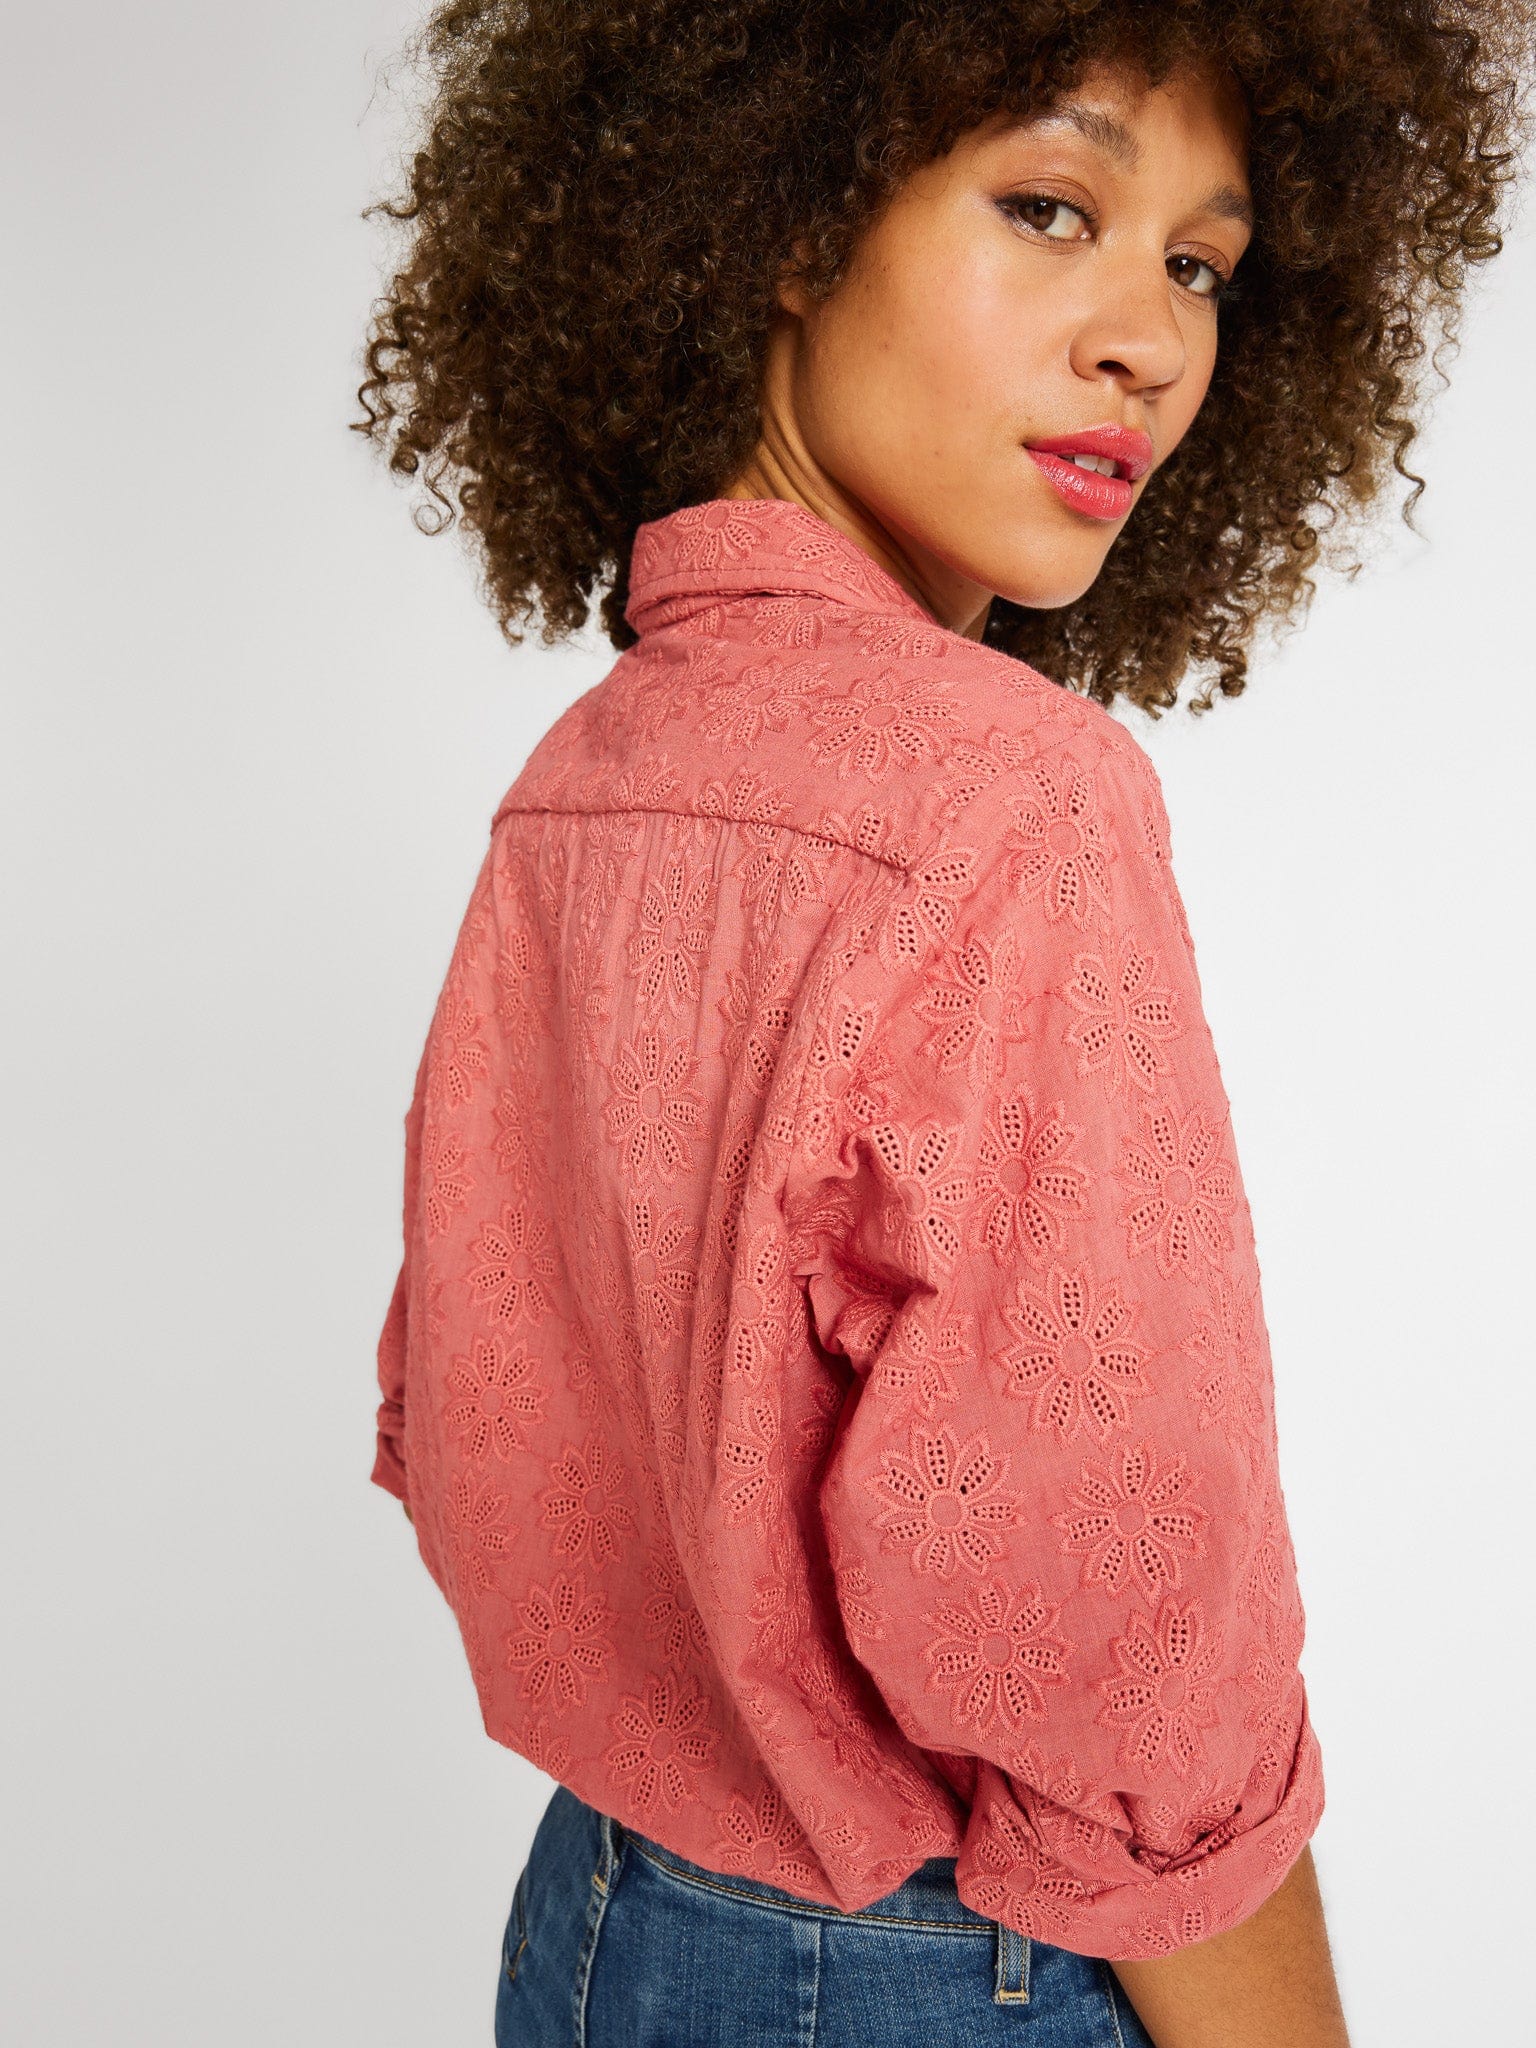 MILLE Clothing Sofia Top in Rosewood Eyelet